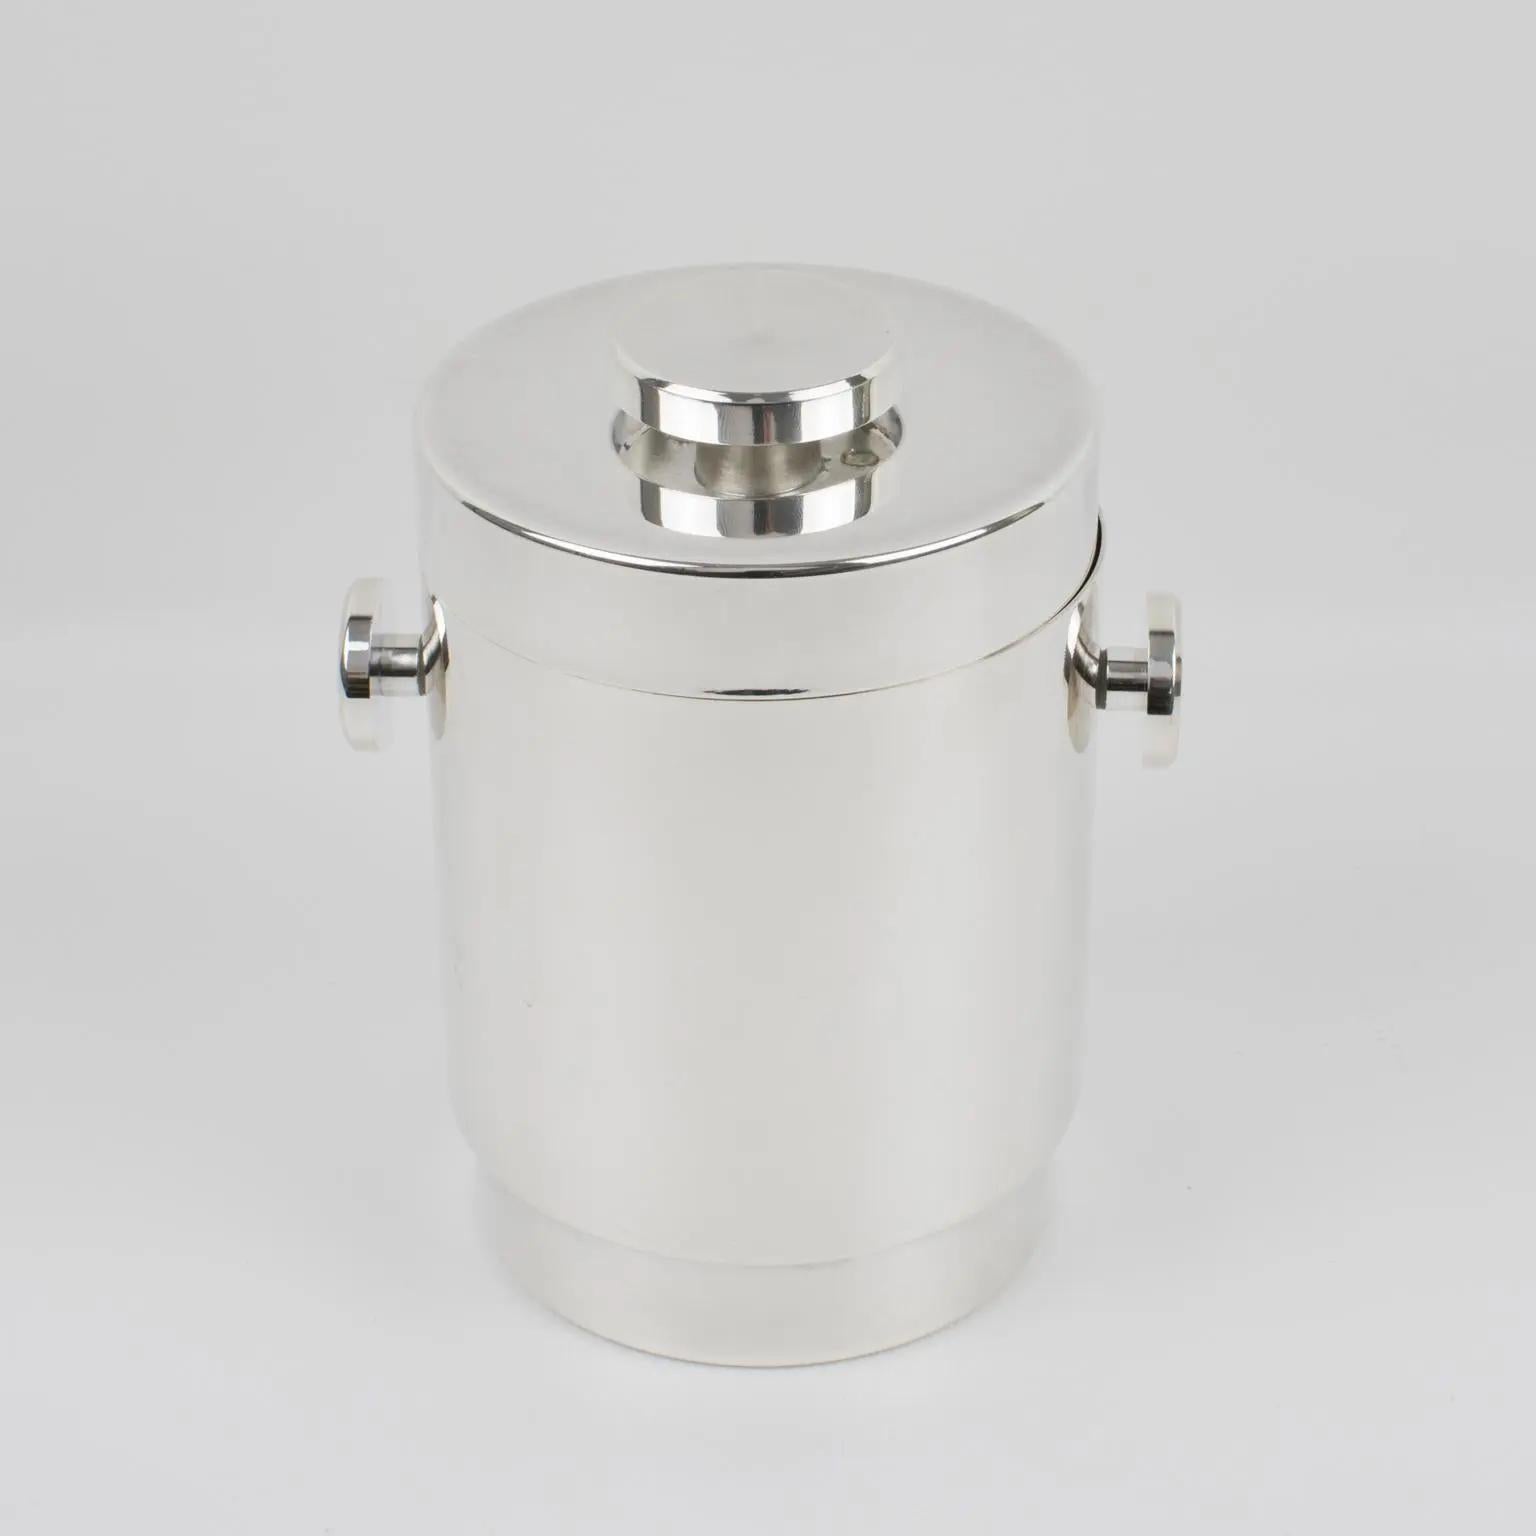 Lancel Silver Plate Ice Bucket Cooler, France 1970s in Original Box For Sale 4